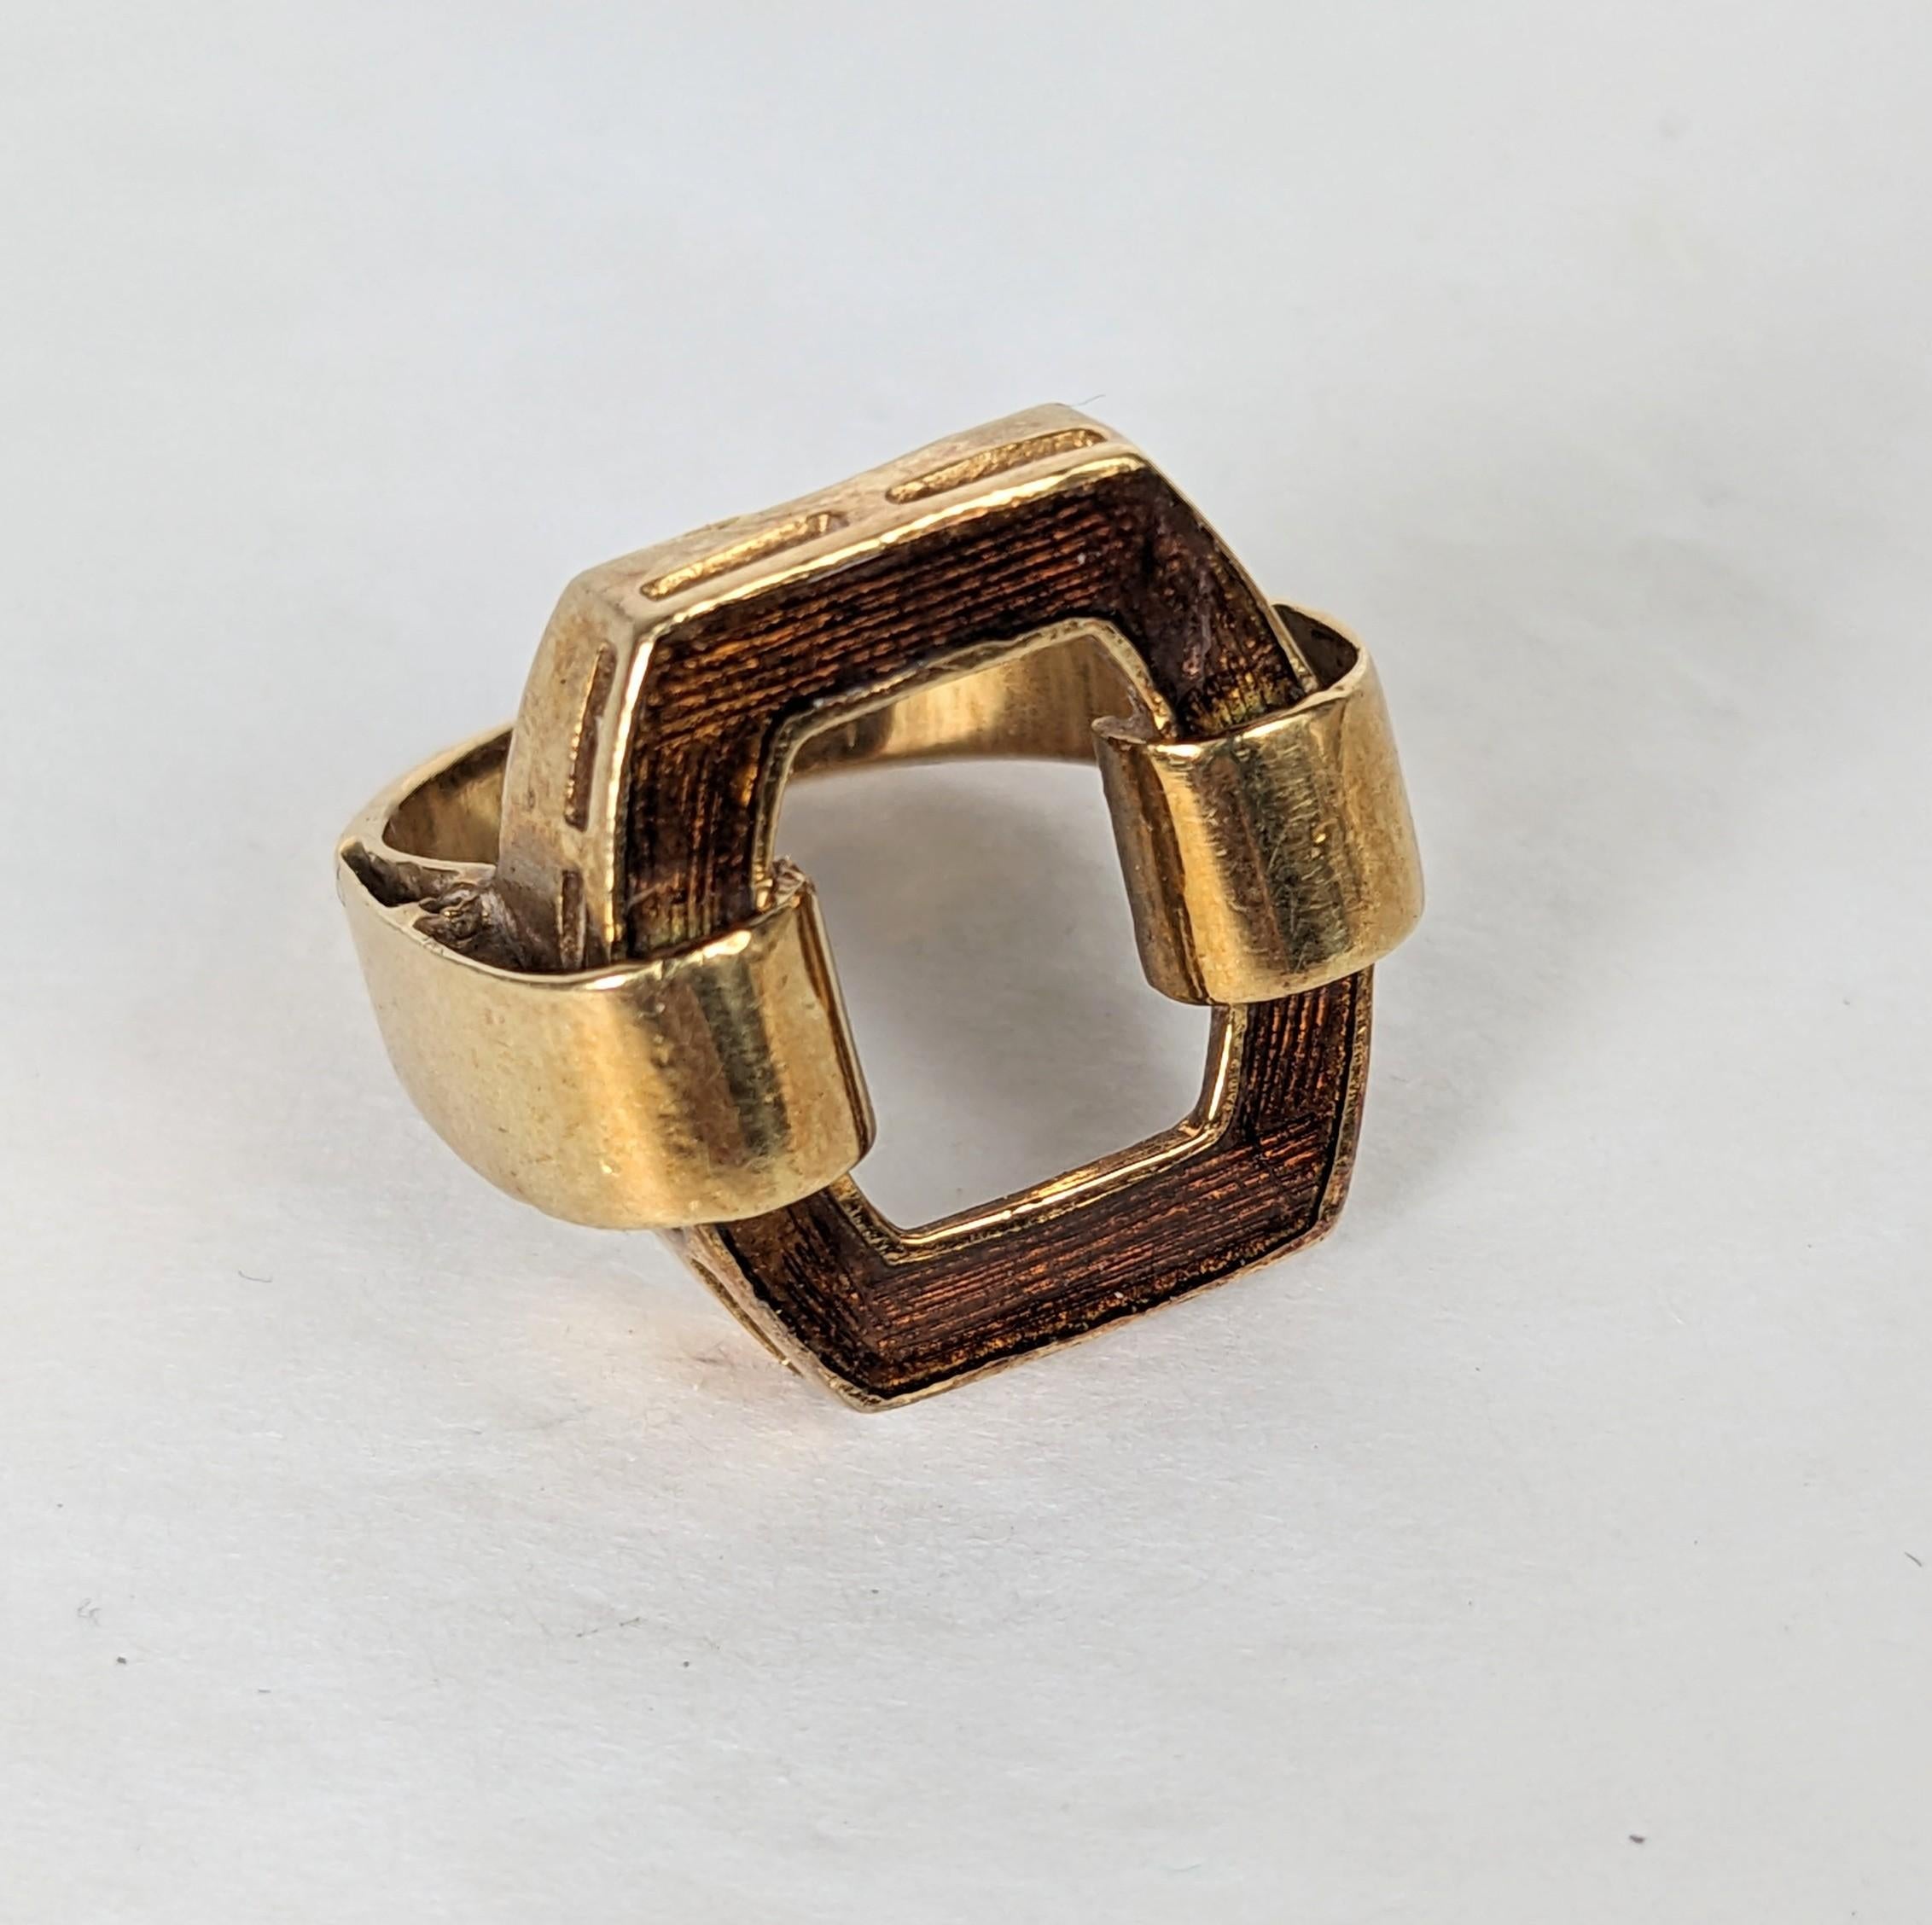 Elegant Enamel and Gold Buckle Ring from the 1970's in 14k gold with guilloche enamel in bronze. Unmarked but tested. Smaller size. Size 4. Buckle 5/8